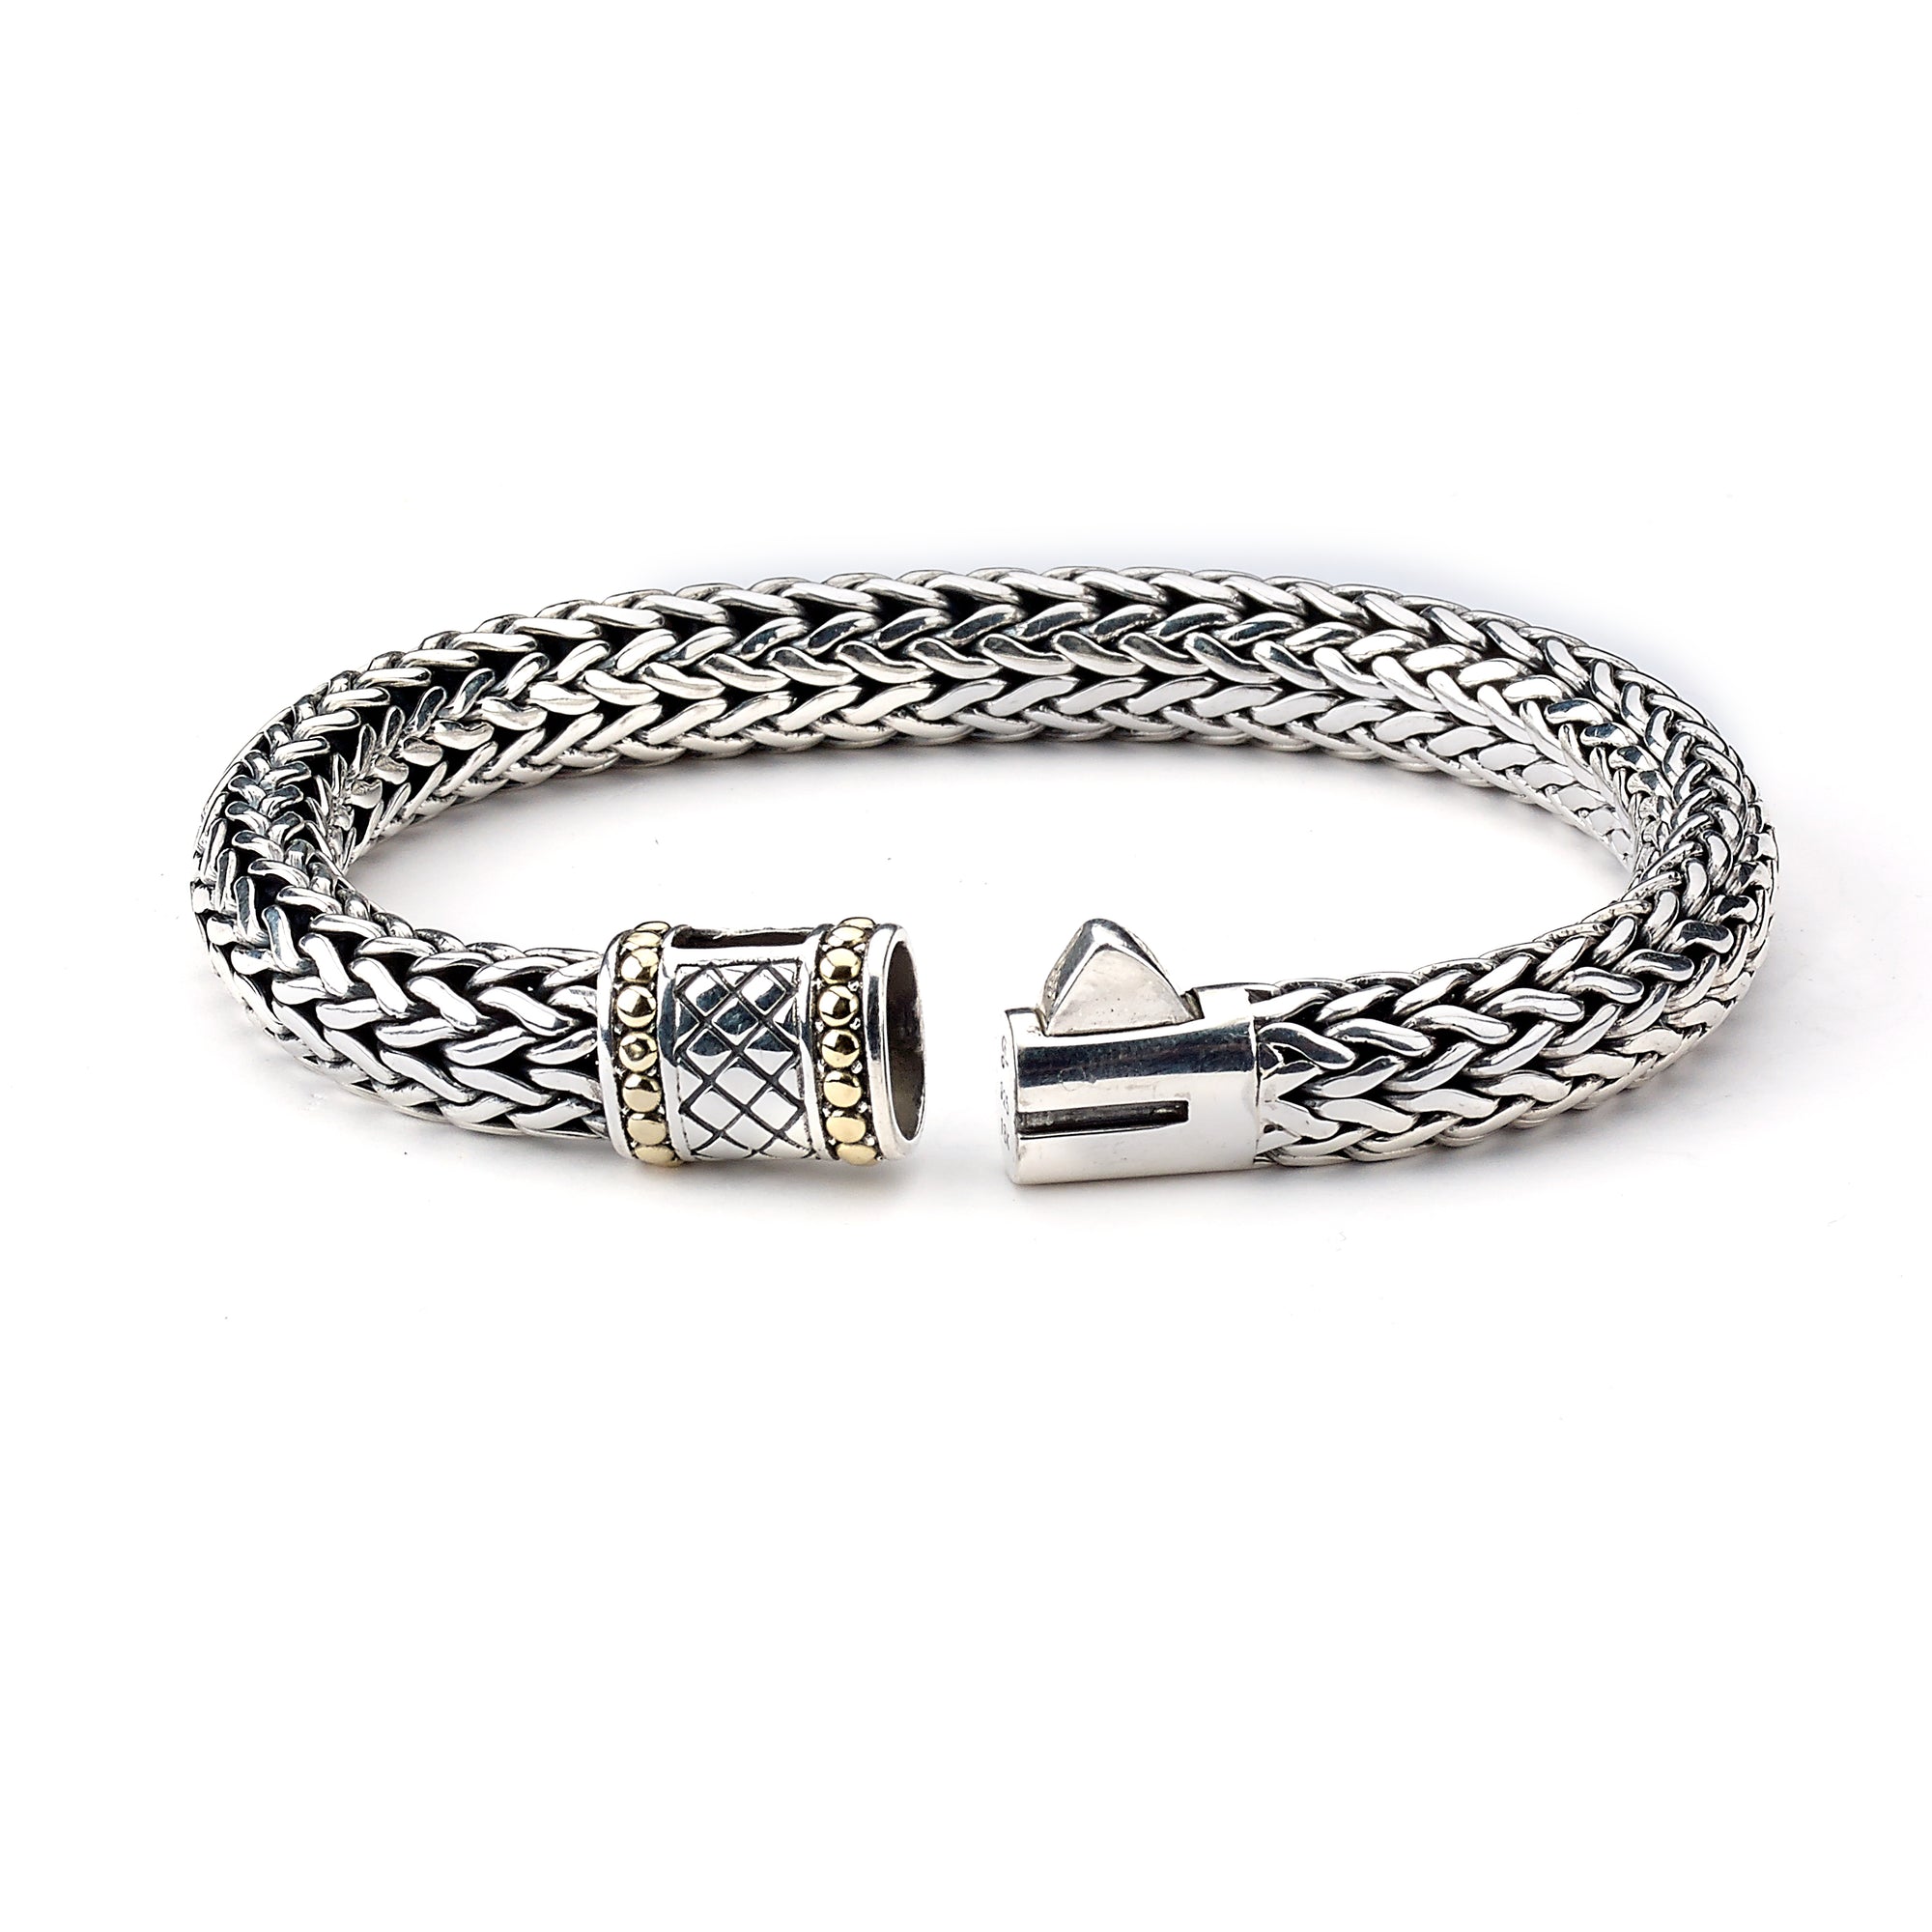 Bamboo Palm Men's Bracelet available at Talisman Collection Fine Jewelers in El Dorado Hills, CA and online. Specs: Bamboo Palm Bracelet crafted in Sterling Silver with 18k gold accents. 8.5"